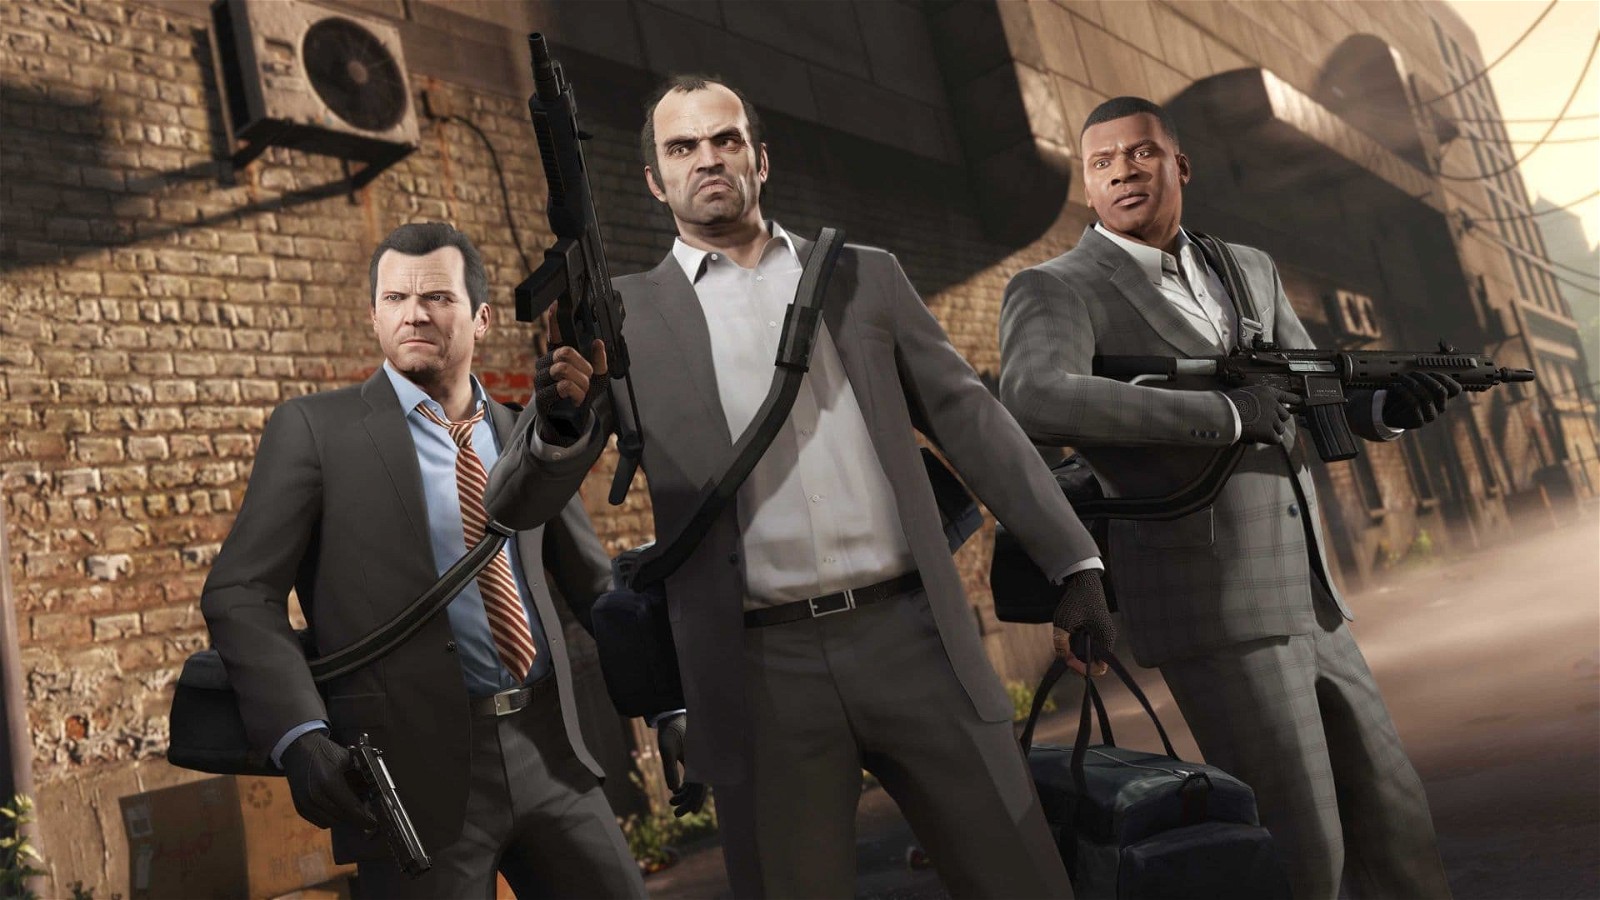 Ned Luke was playing GTA 5 on the YouTube livestream when he was swatted.